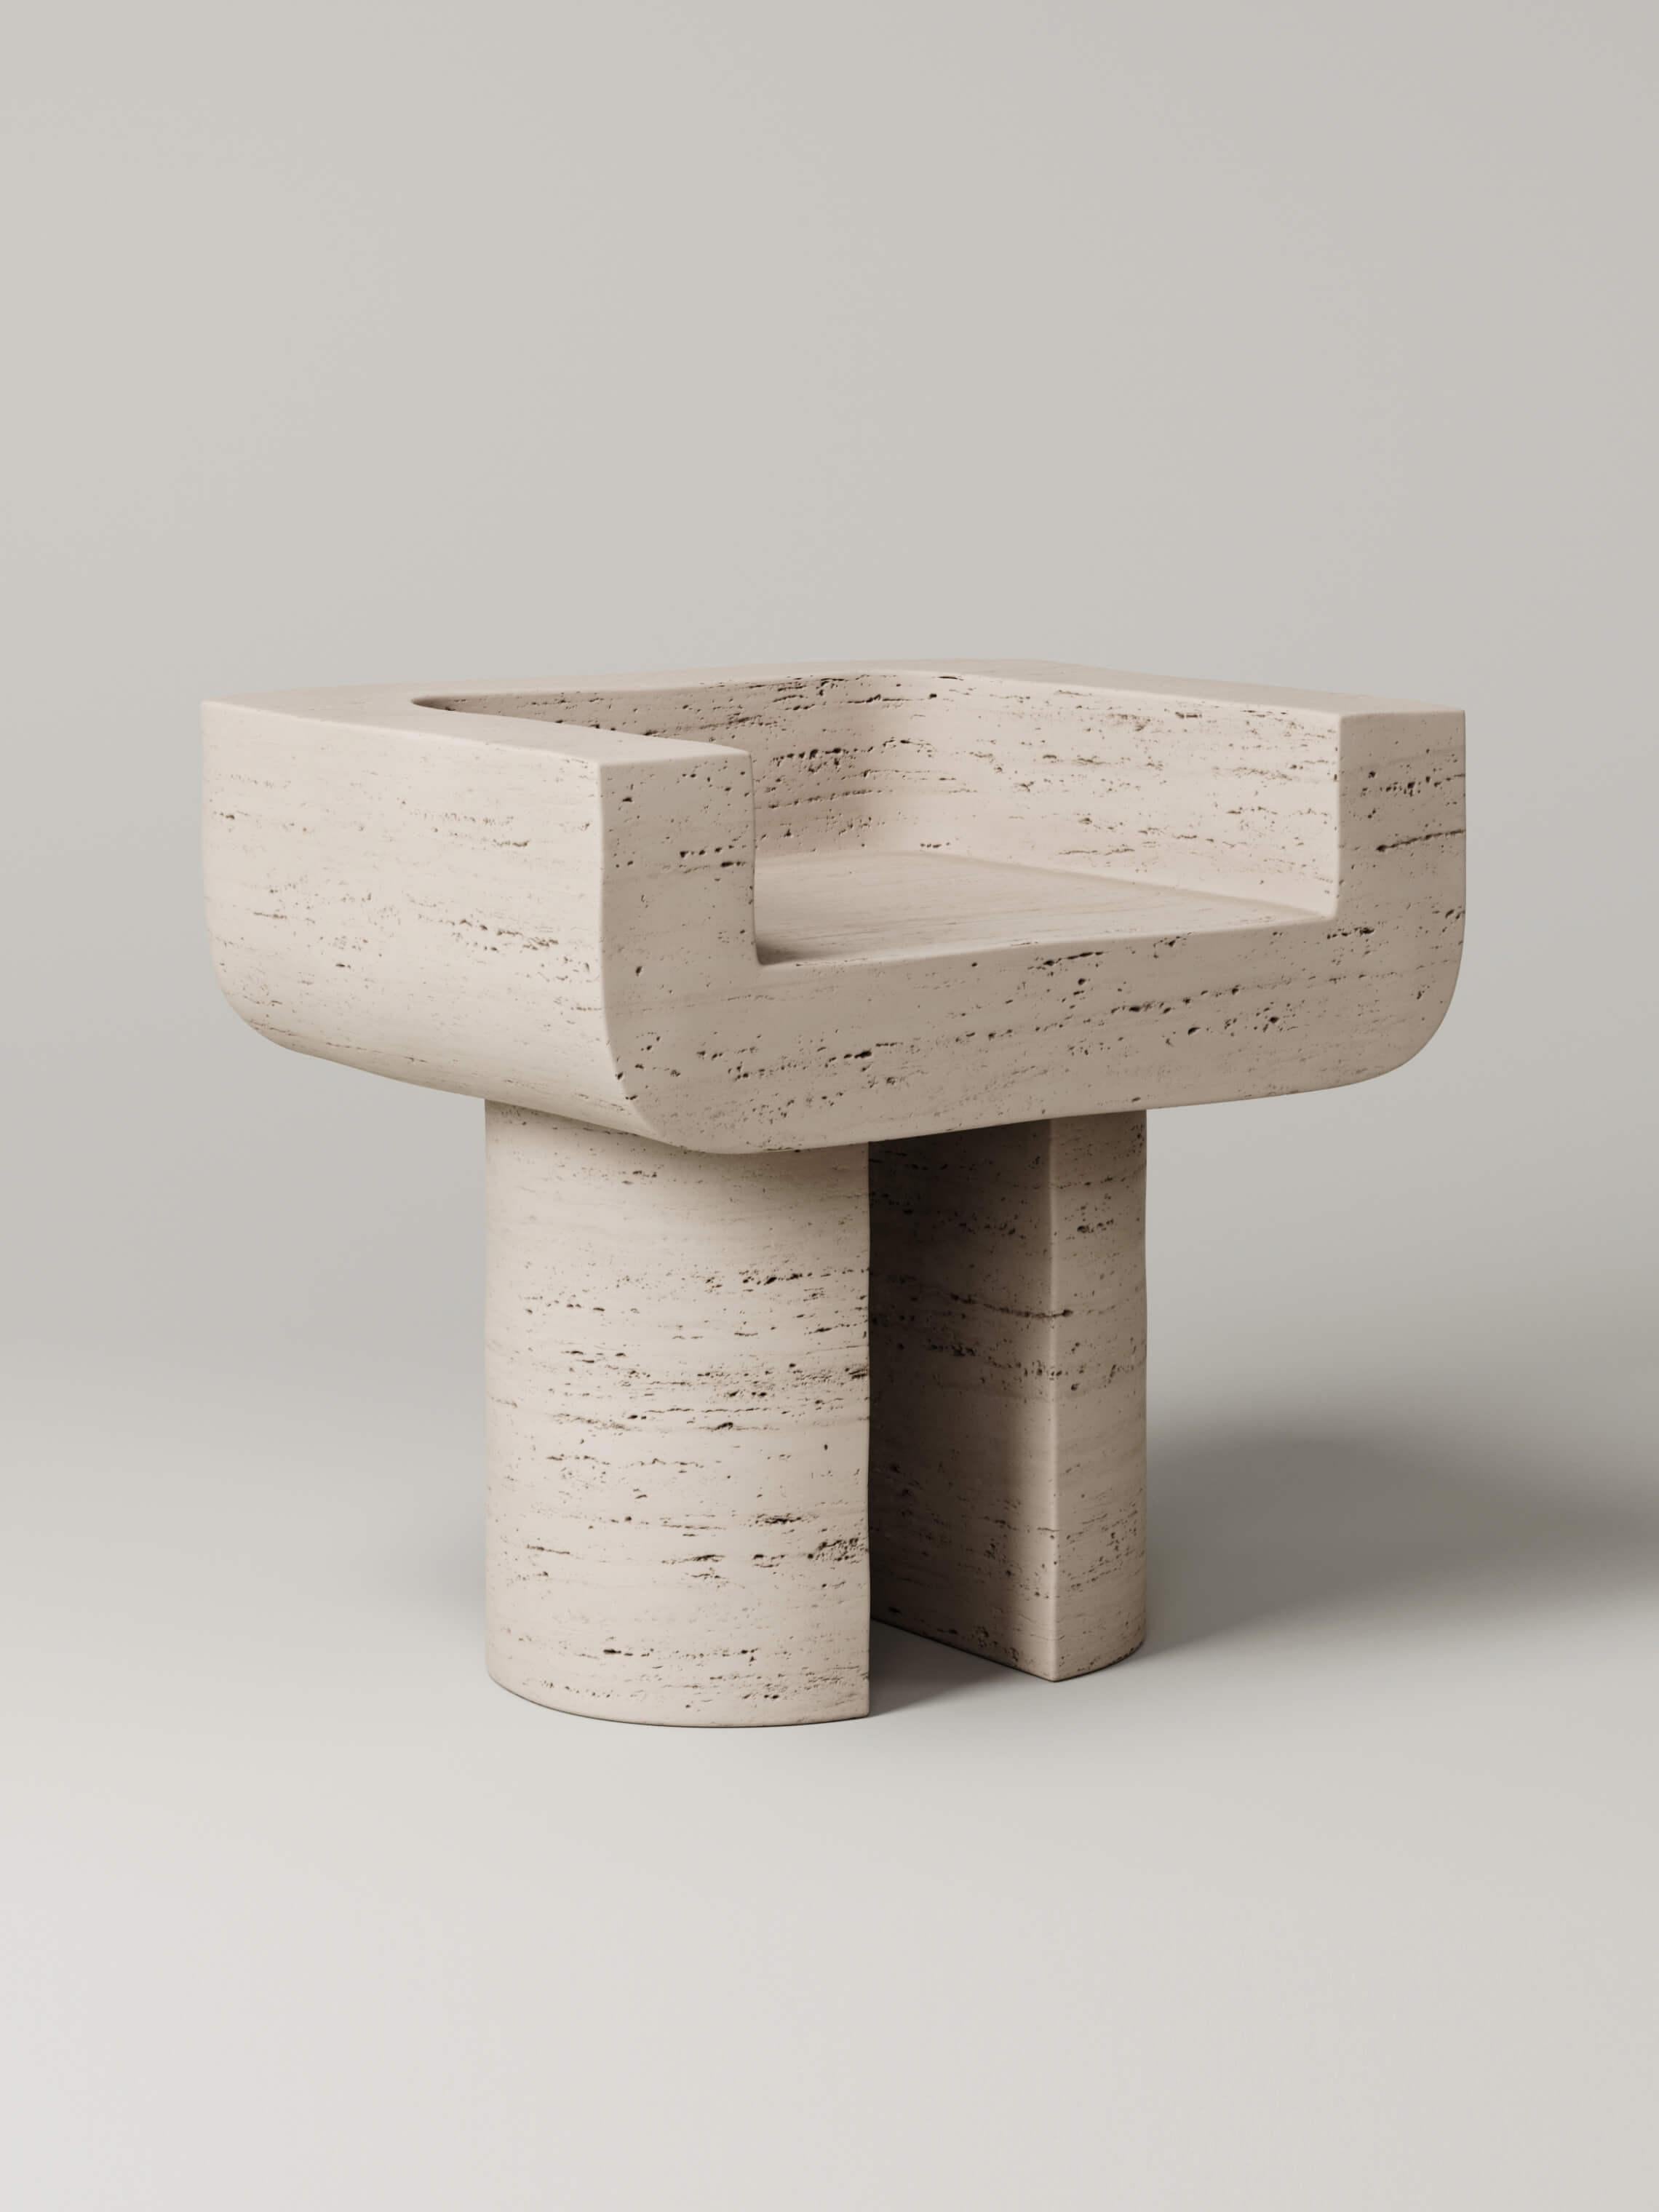 M_001 Travertine Chair by Monolith Studio
Signed and Numbered.
Dimensions: D 53,5 x W 65 x H 58,5 cm.
Materials: Travertine. 

Available in travertine, white onyx, lava rock and white oak. Please contact us. 

Monolith, founded in 2022 by Marc